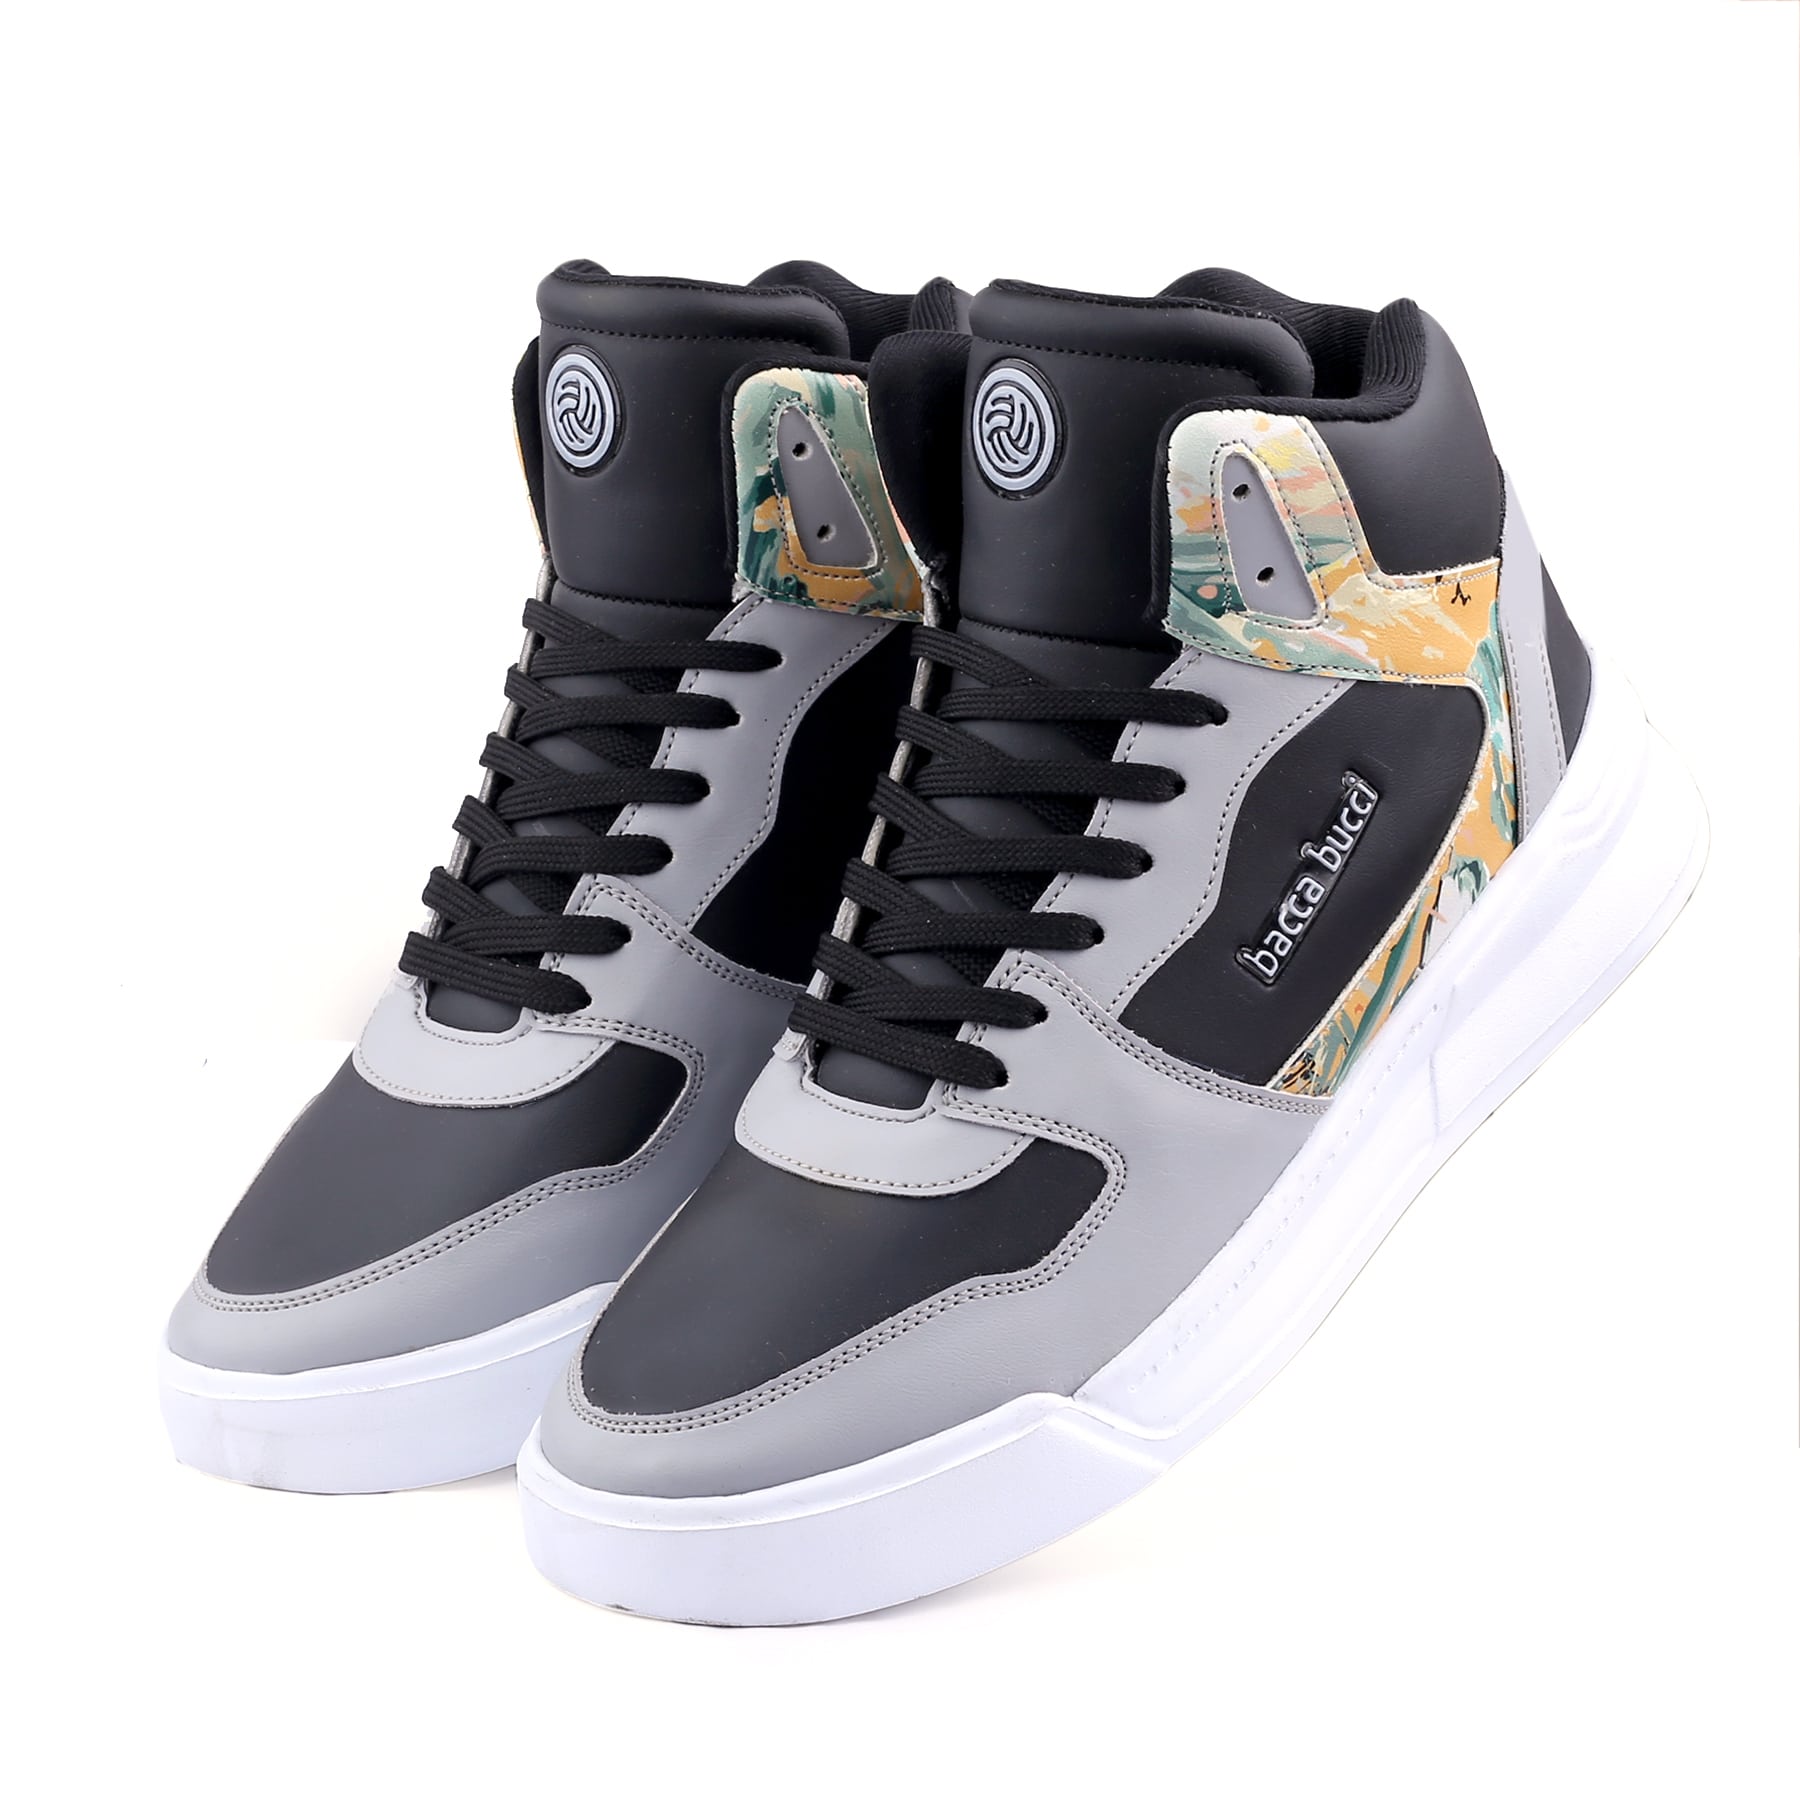 Bacca Bucci GYUKI Mid-Top Colorblock Street Fashion Men's Sneakers with Lightweighted Rubber Outsole